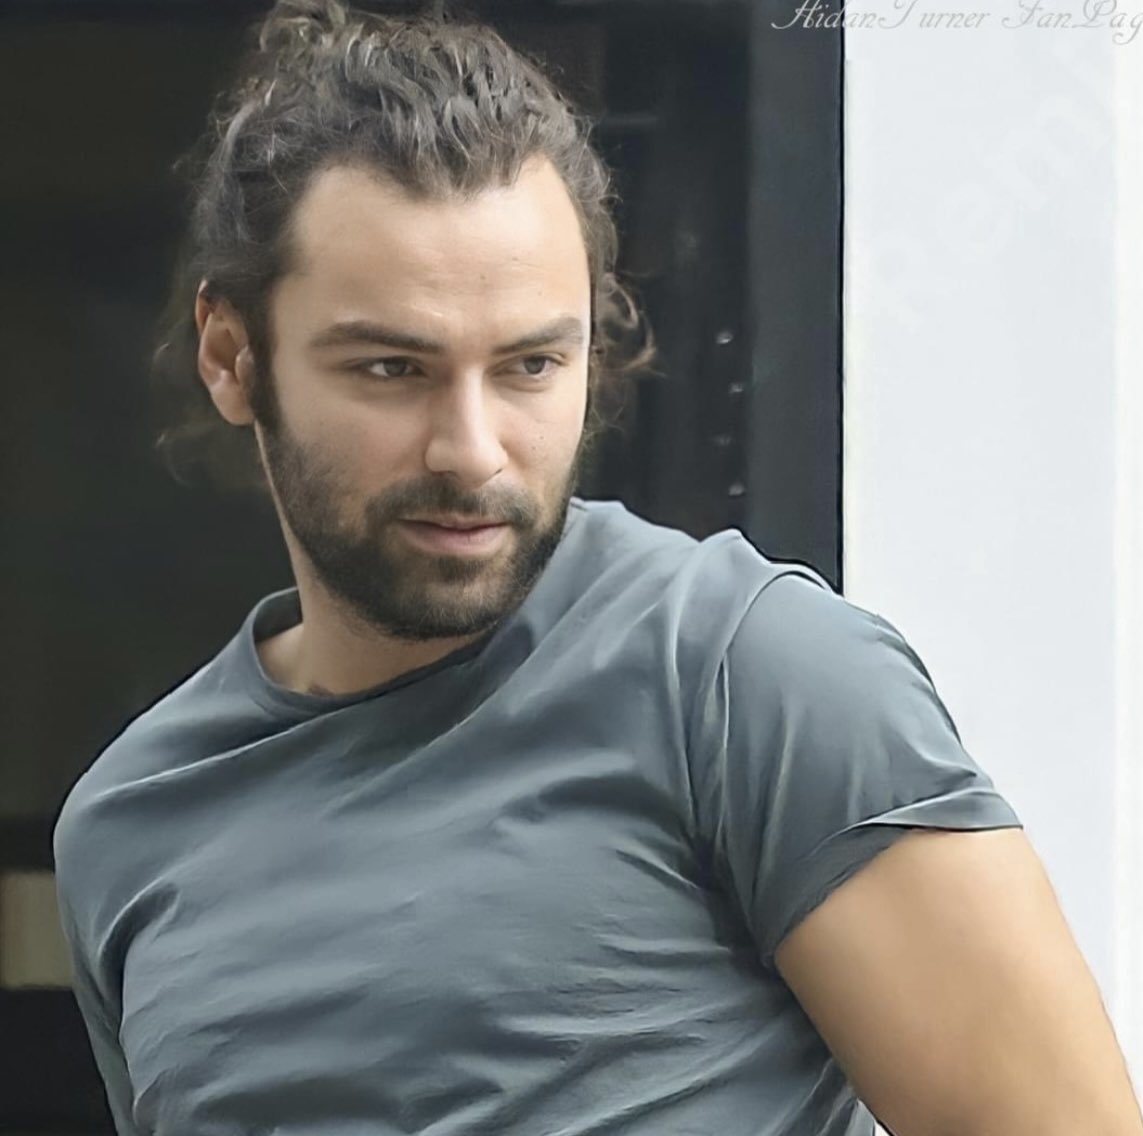 Happy #ThrowbackThursday everyone. Have a nice day. #AidanTurner #AidanCrew (Photo credit to owner)🩵